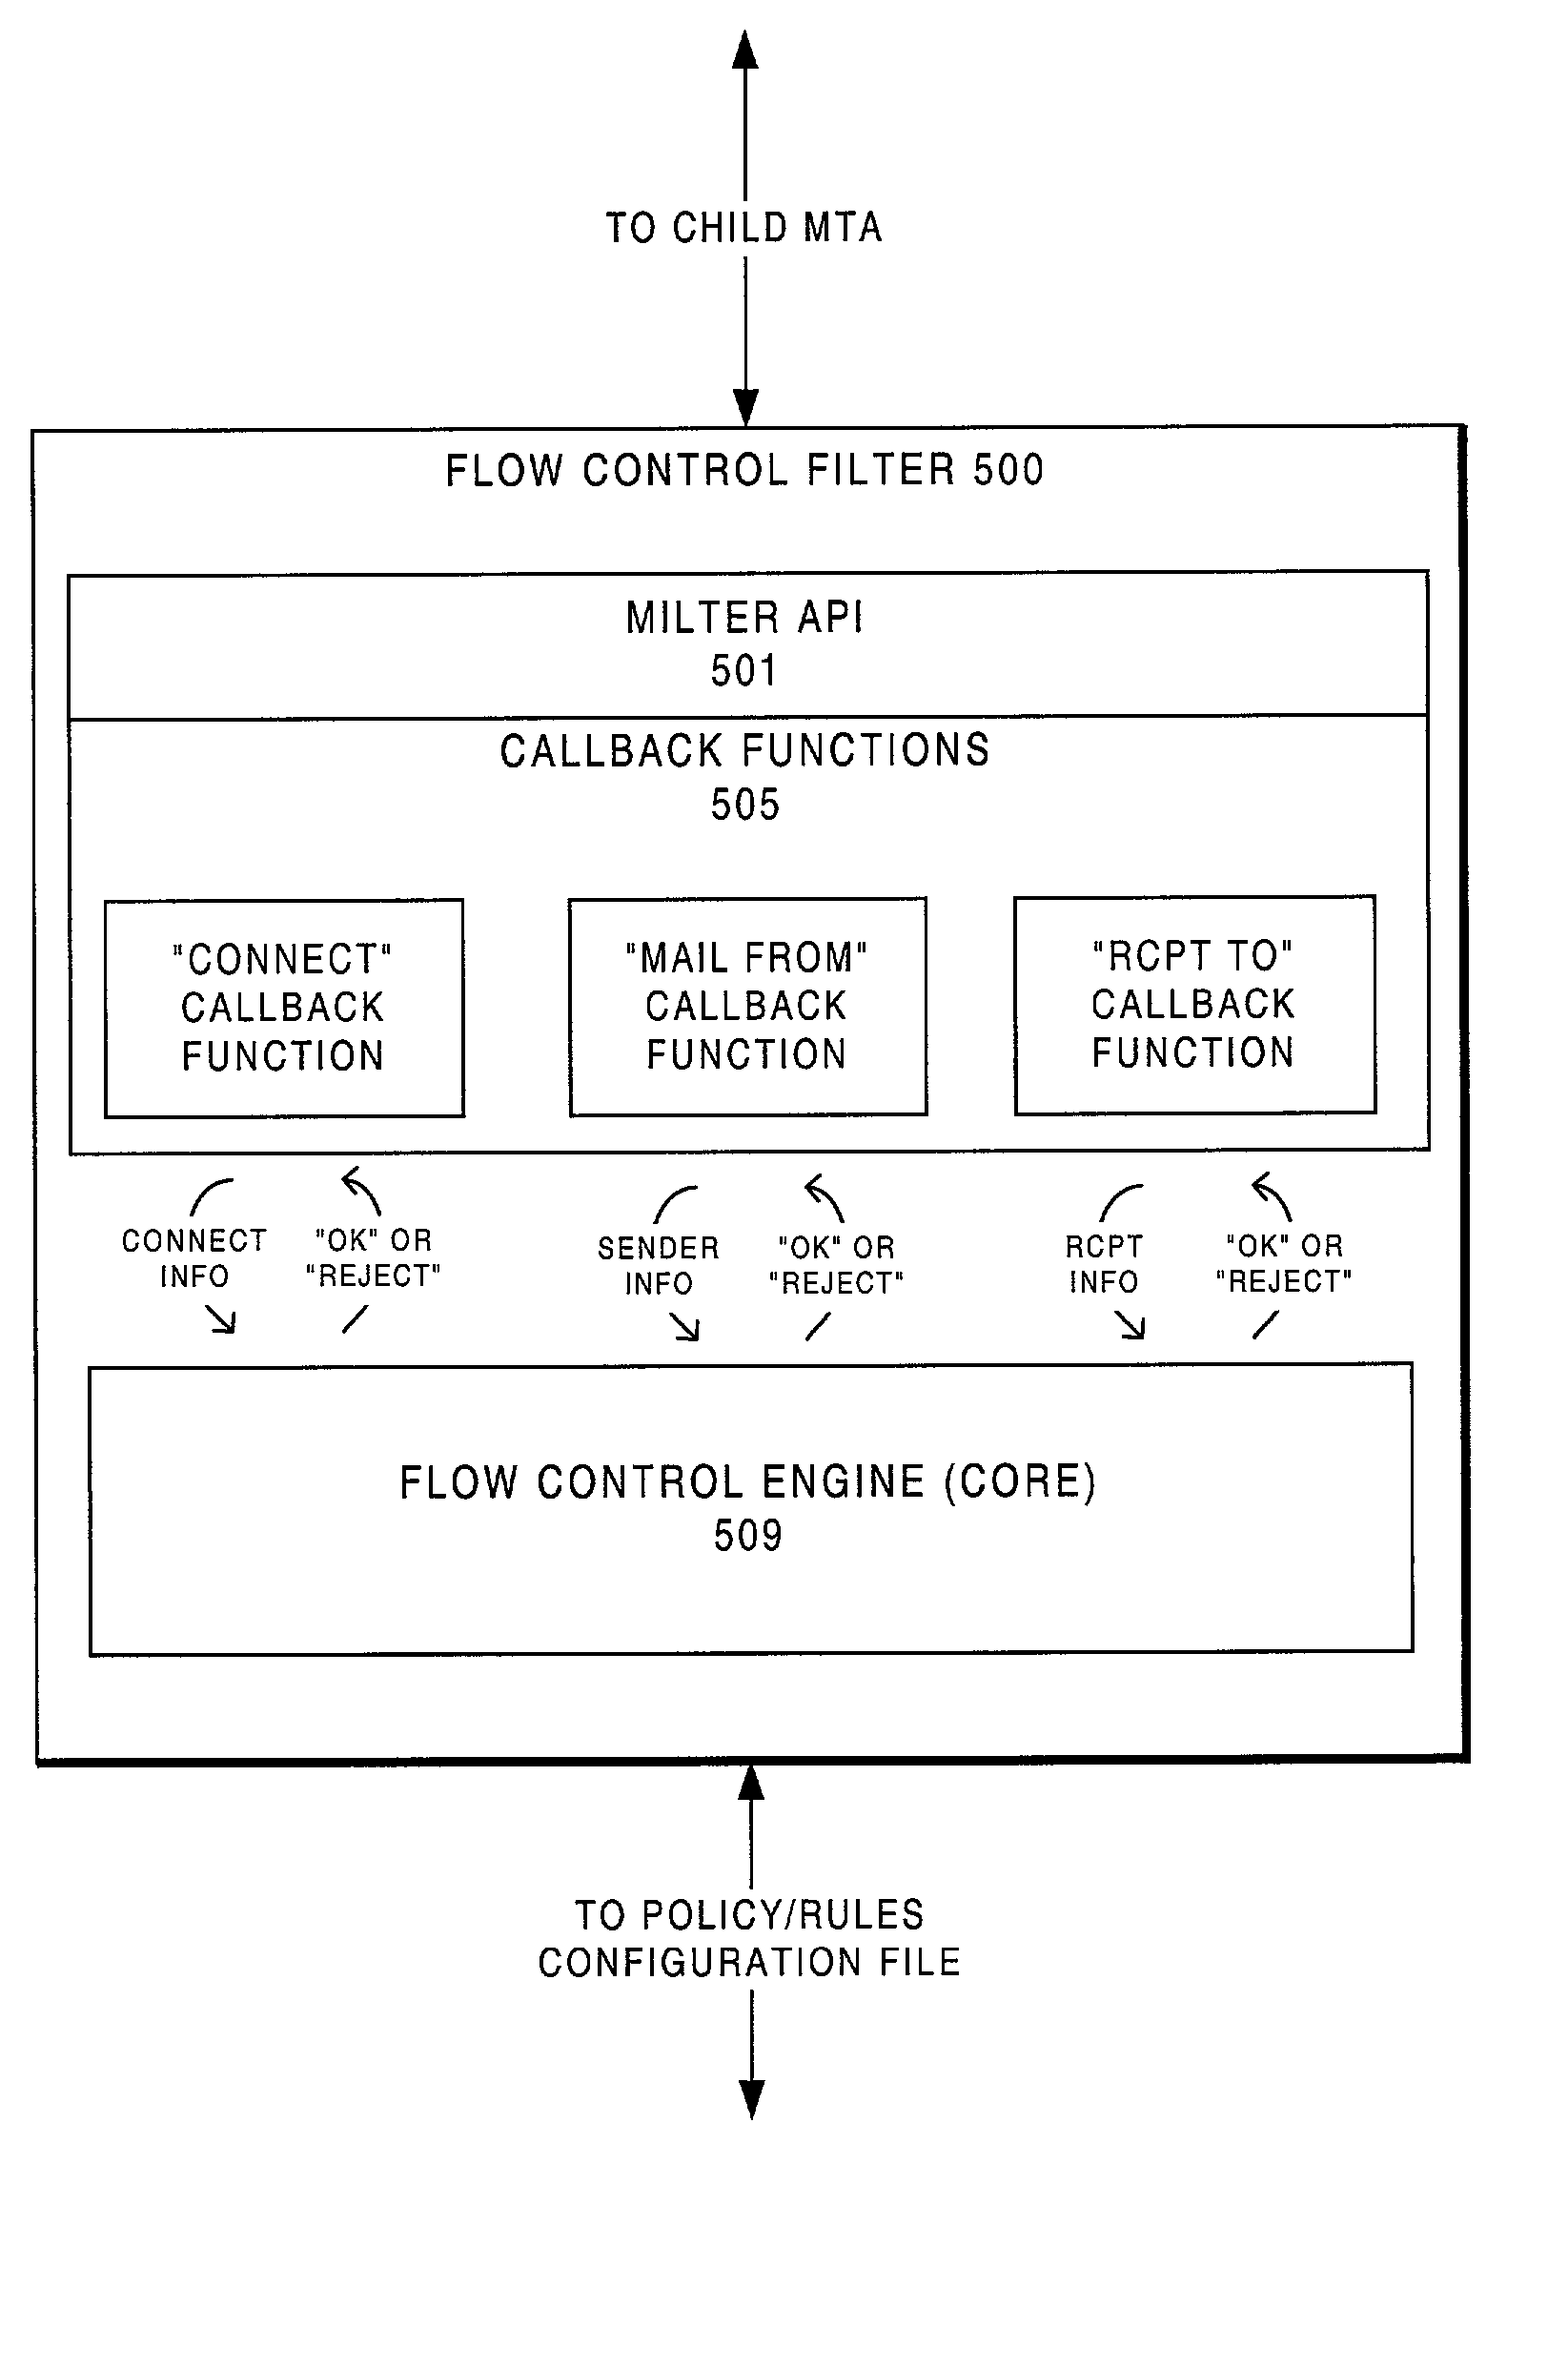 E-mail system providing filtering methodology on a per-domain basis